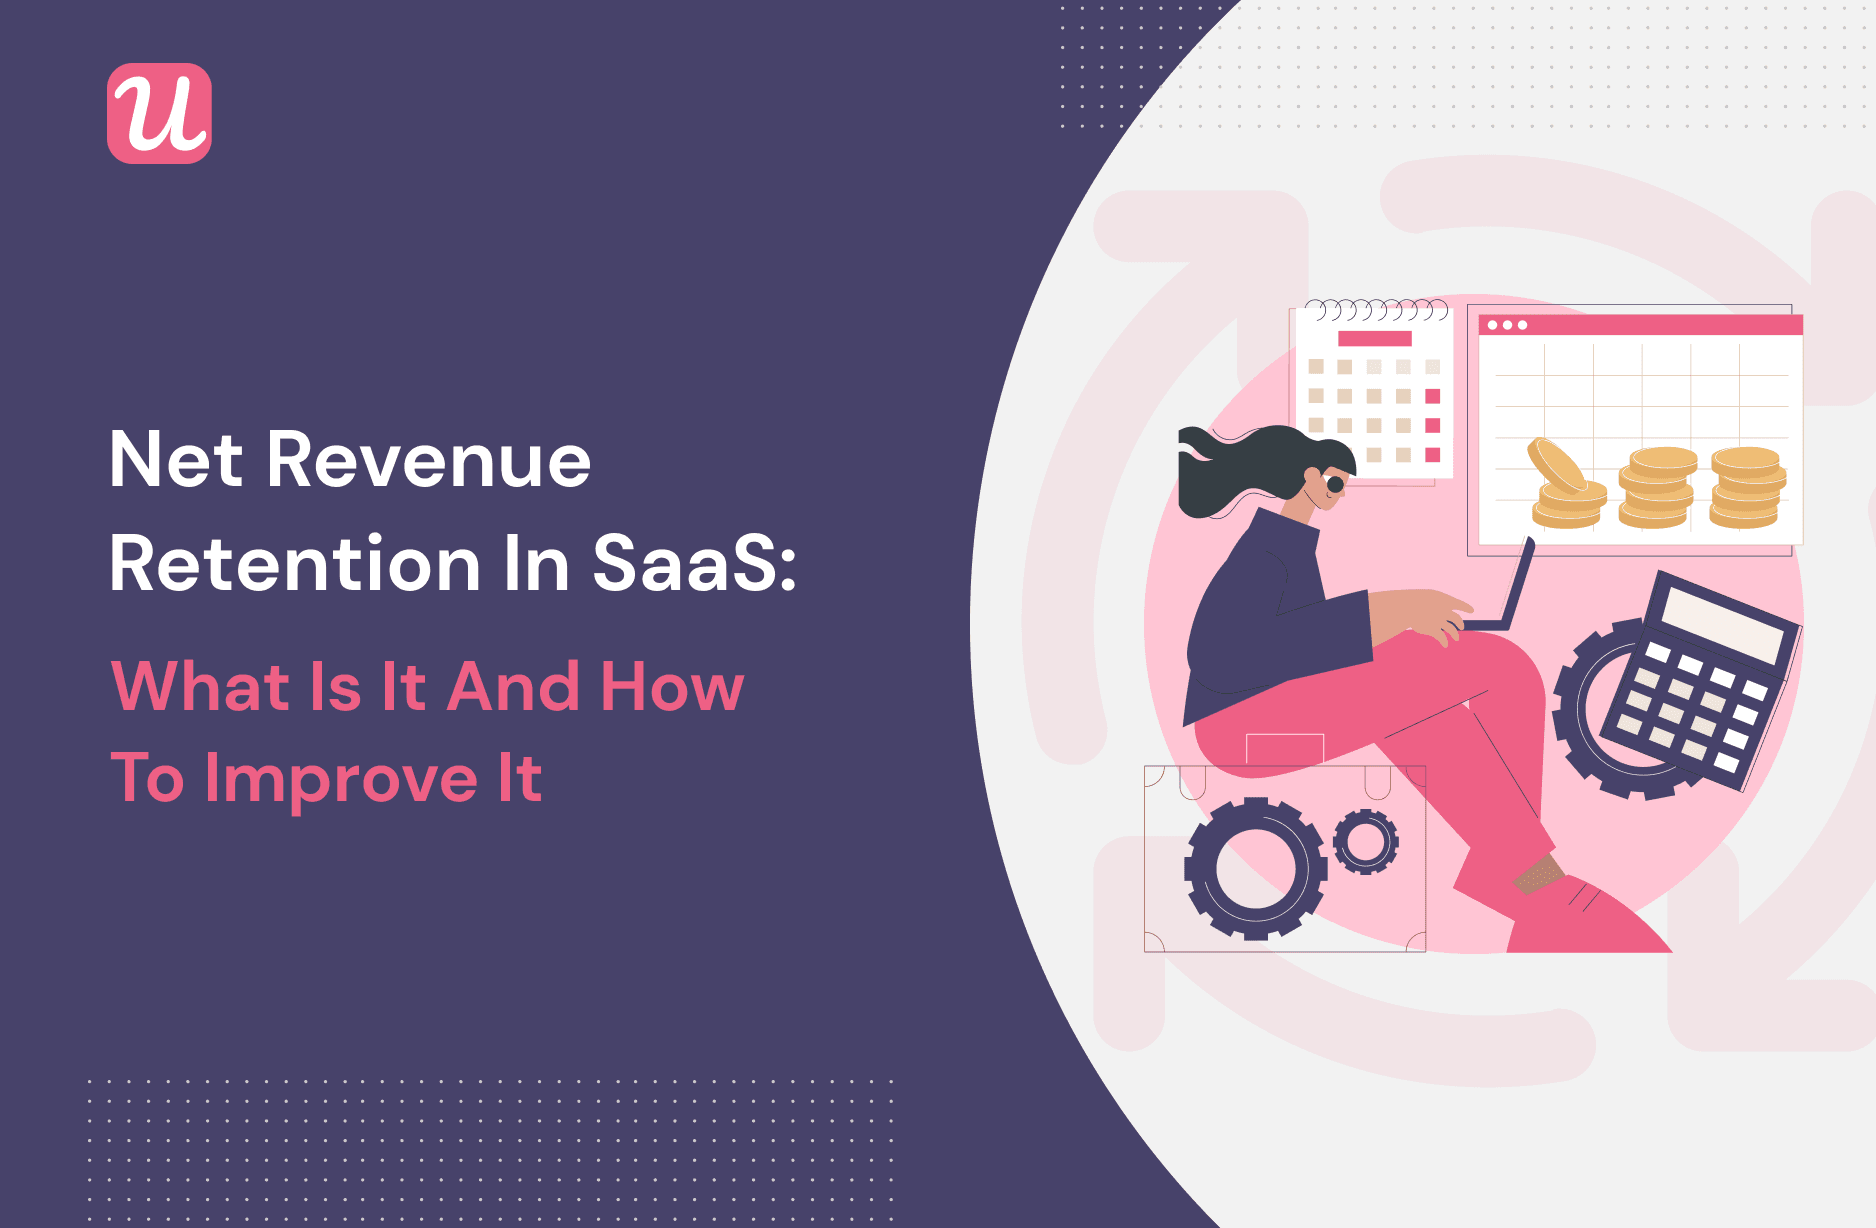 Net Revenue Retention in SaaS: What is it and How to Improve It